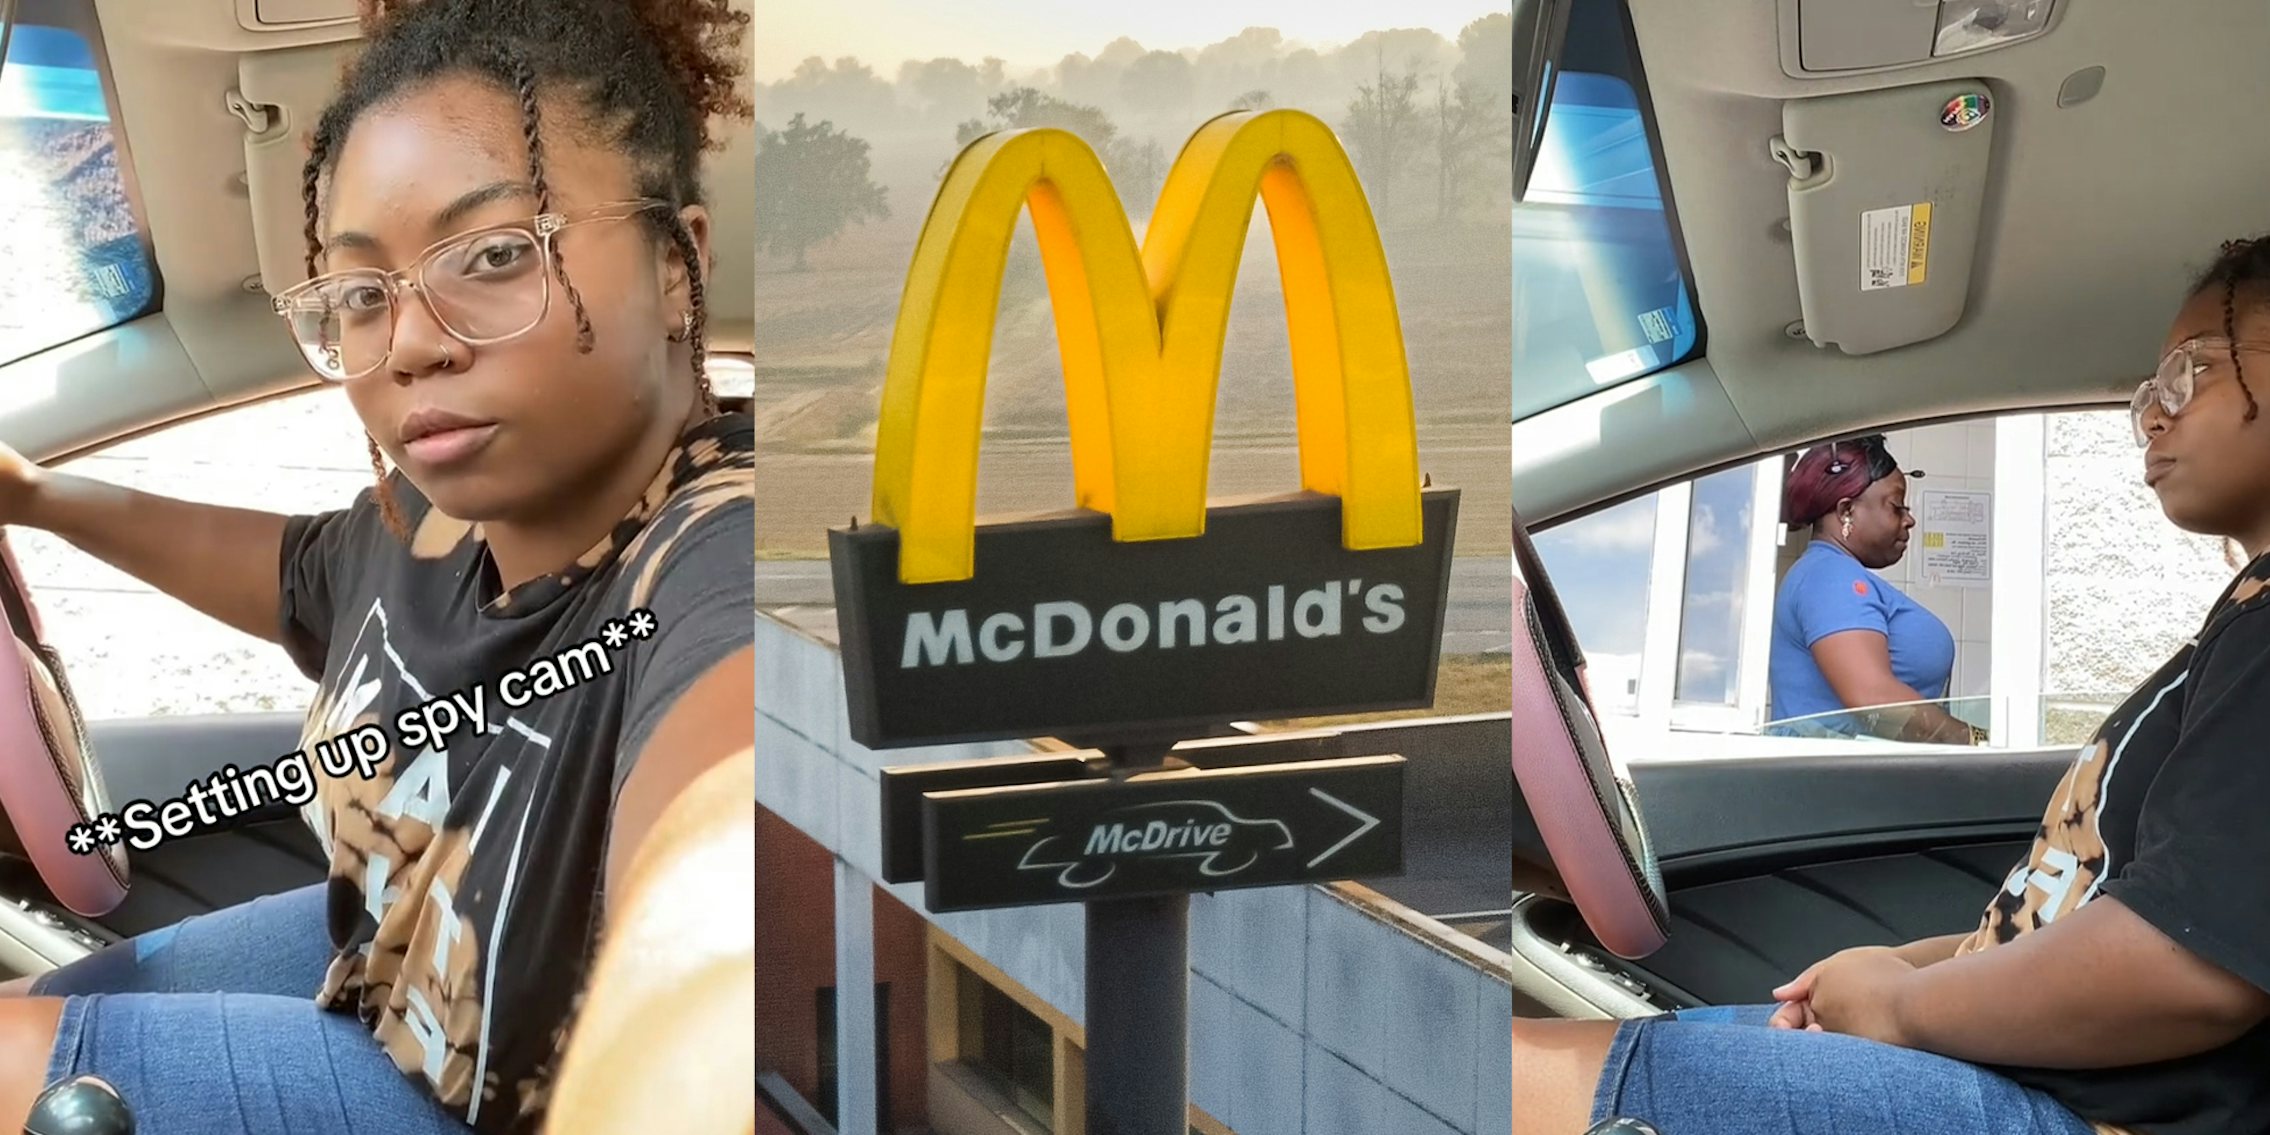 Former McDonald's worker returns to the drive-thru after quitting.